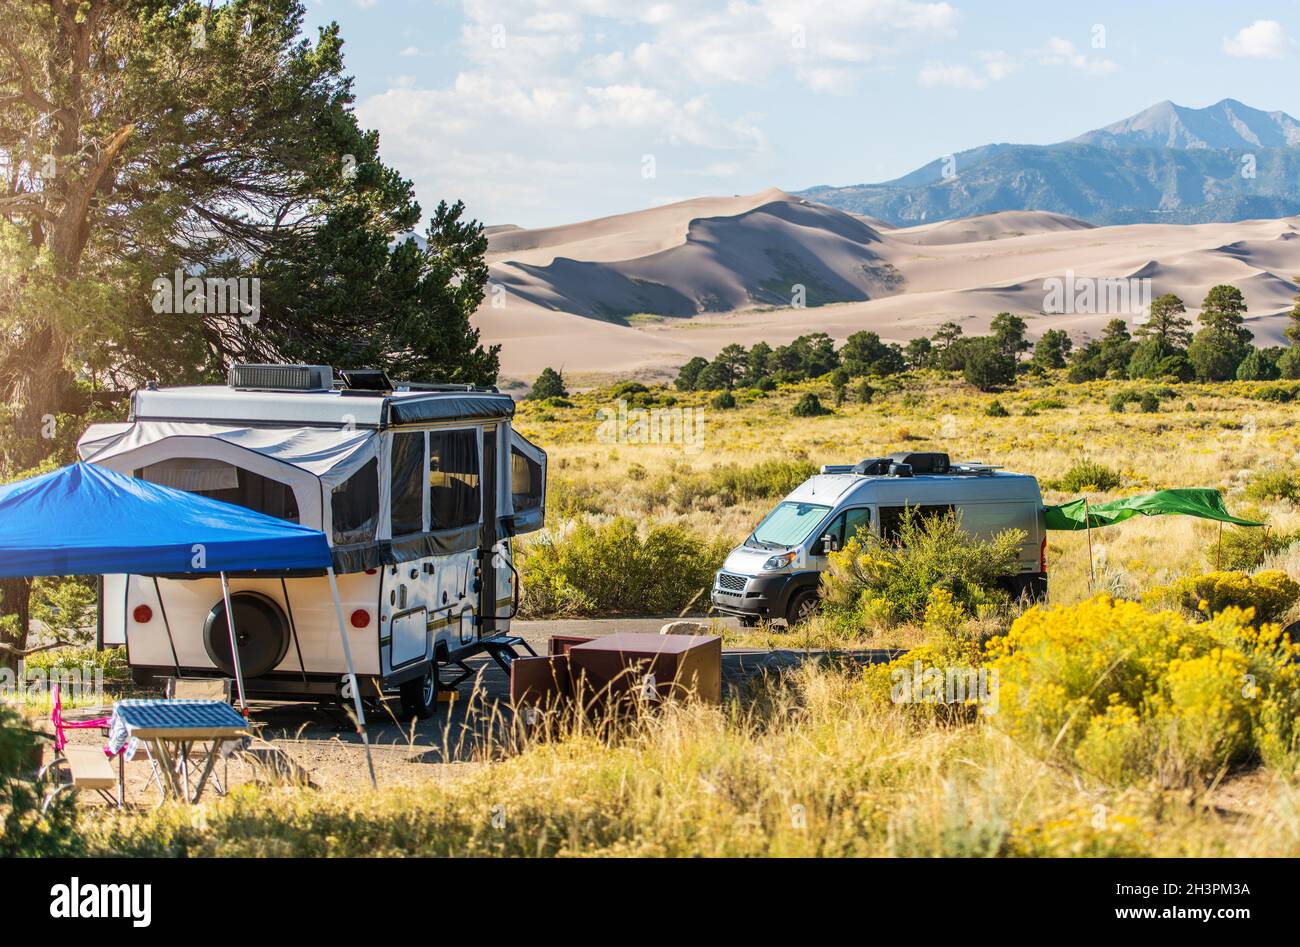 American National Parks Travel. RV Camping in Colorado Great Sand Dunes, United States of America. Stock Photo